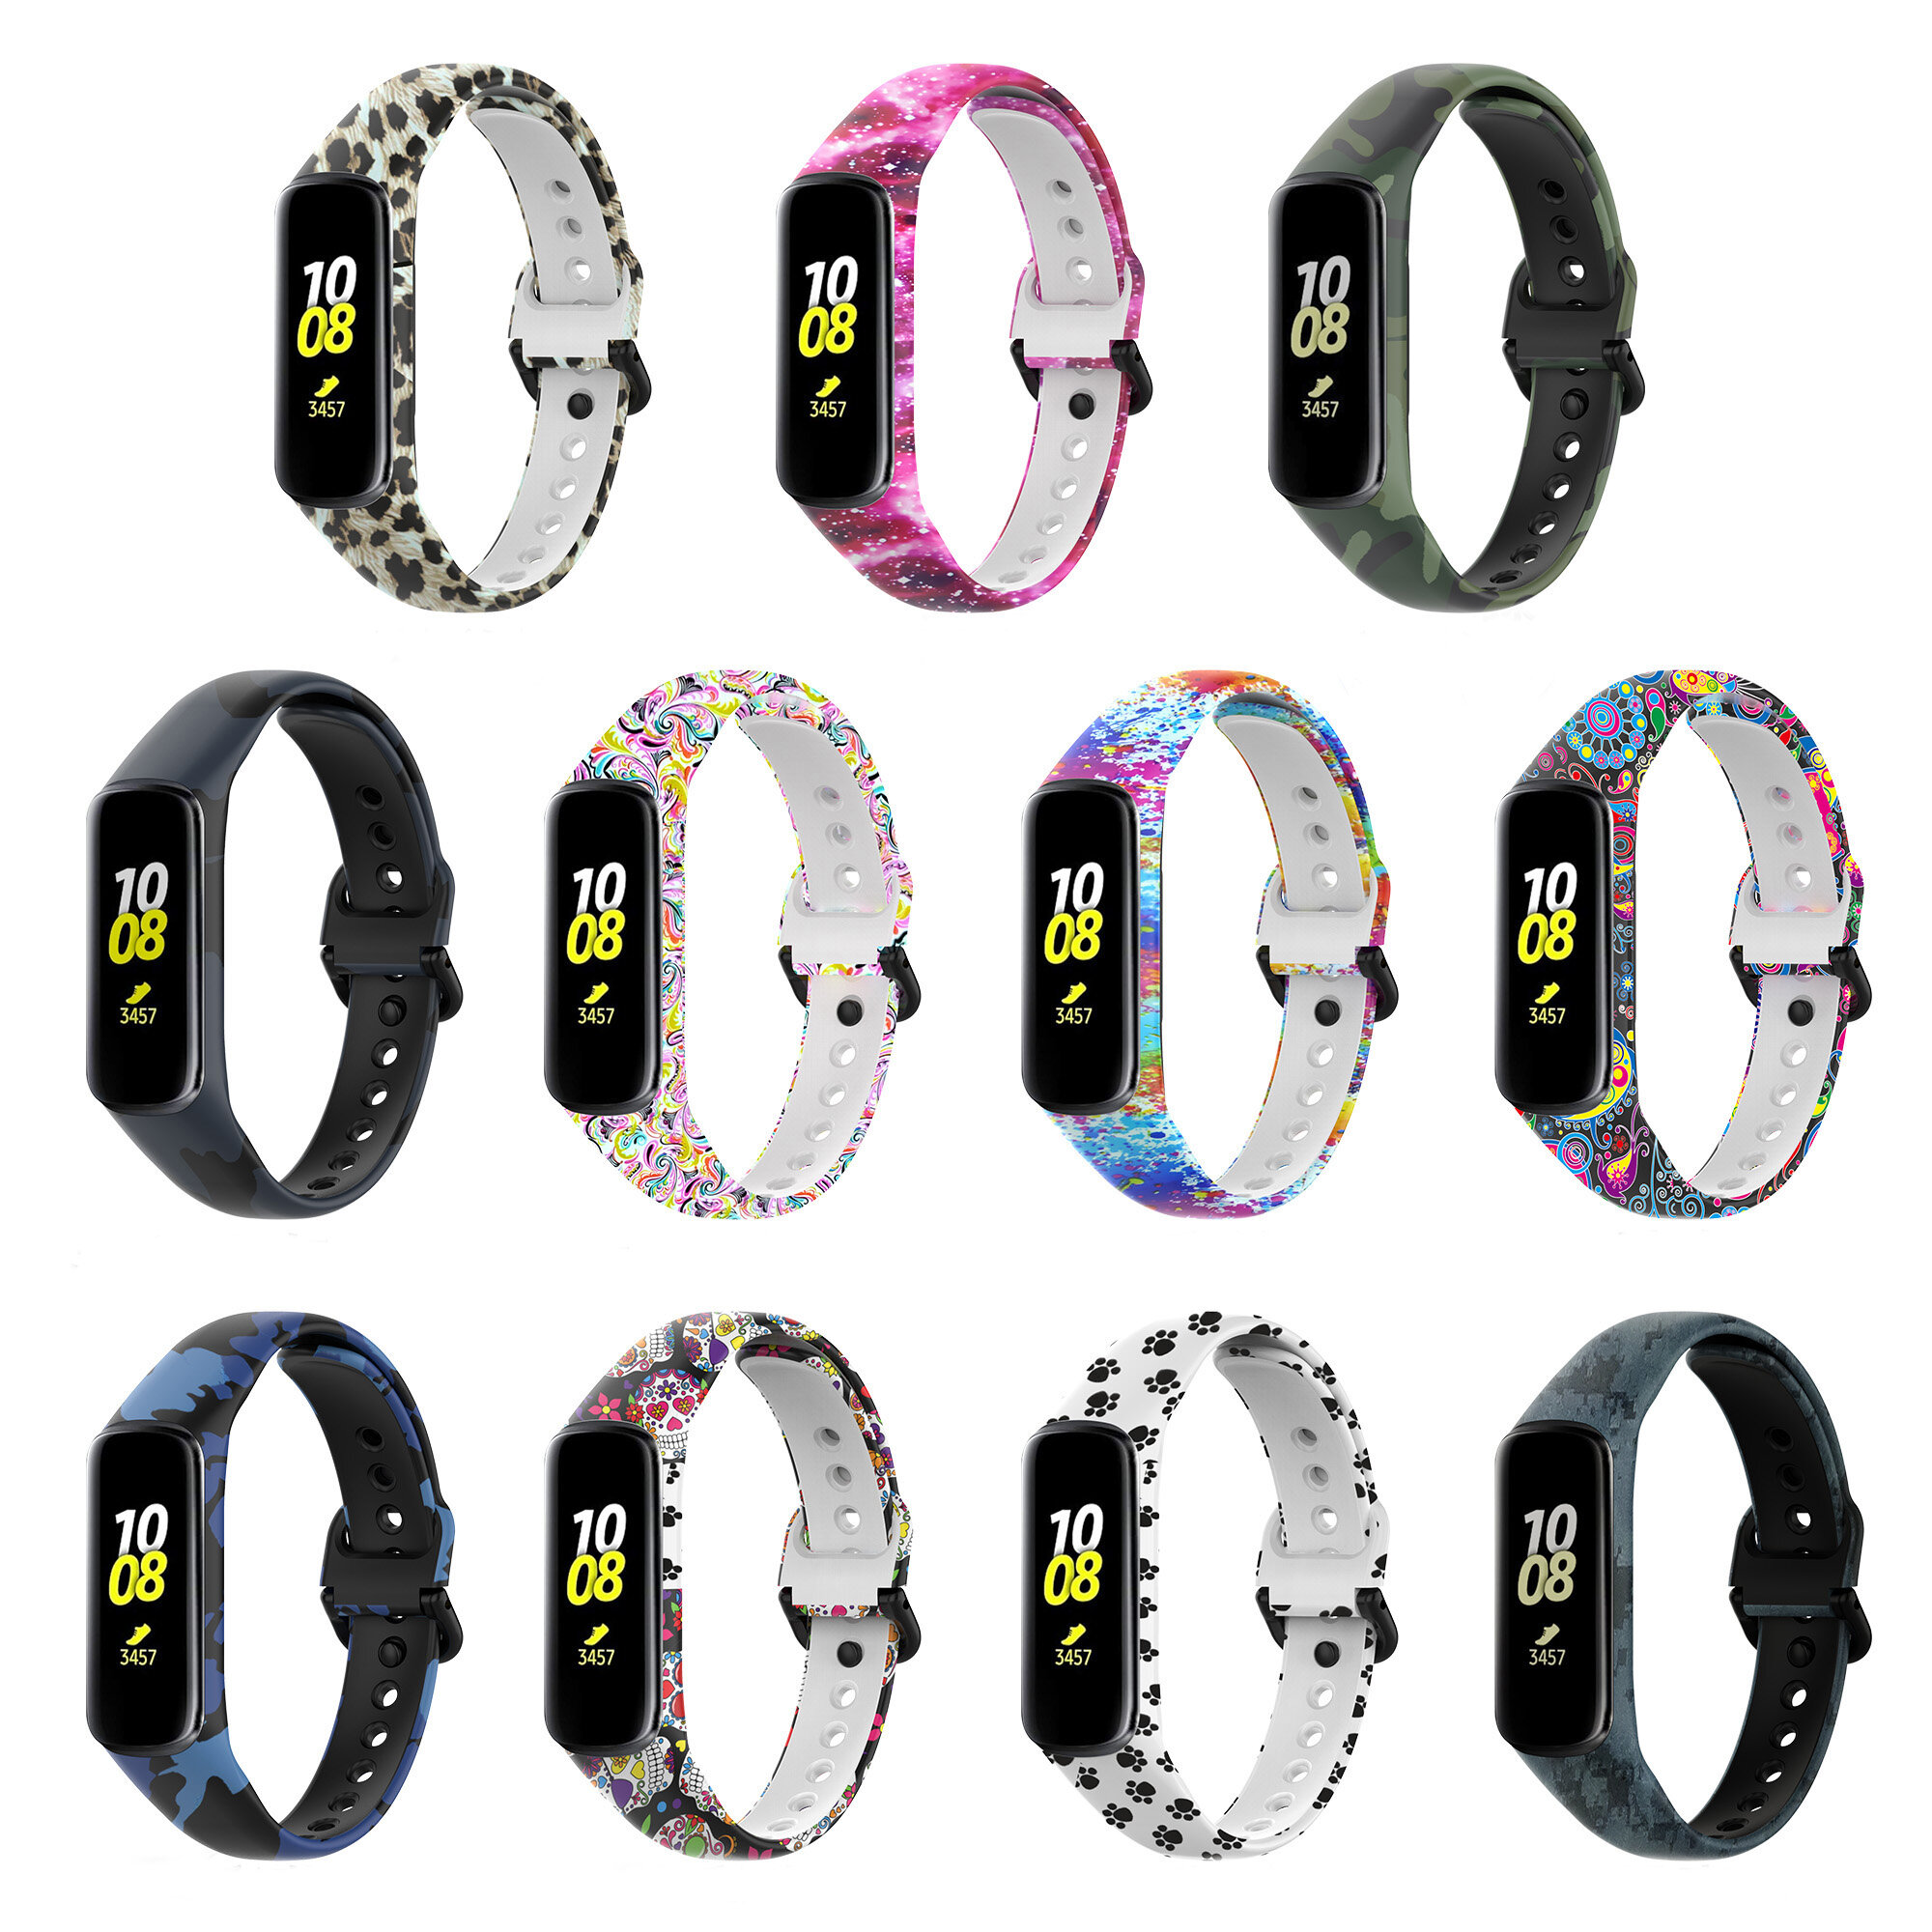 Bakeey Printed Pattern Stainless Steel Buckle Smart watch Band Replacement Strap For Samsung Galaxy Fit 2